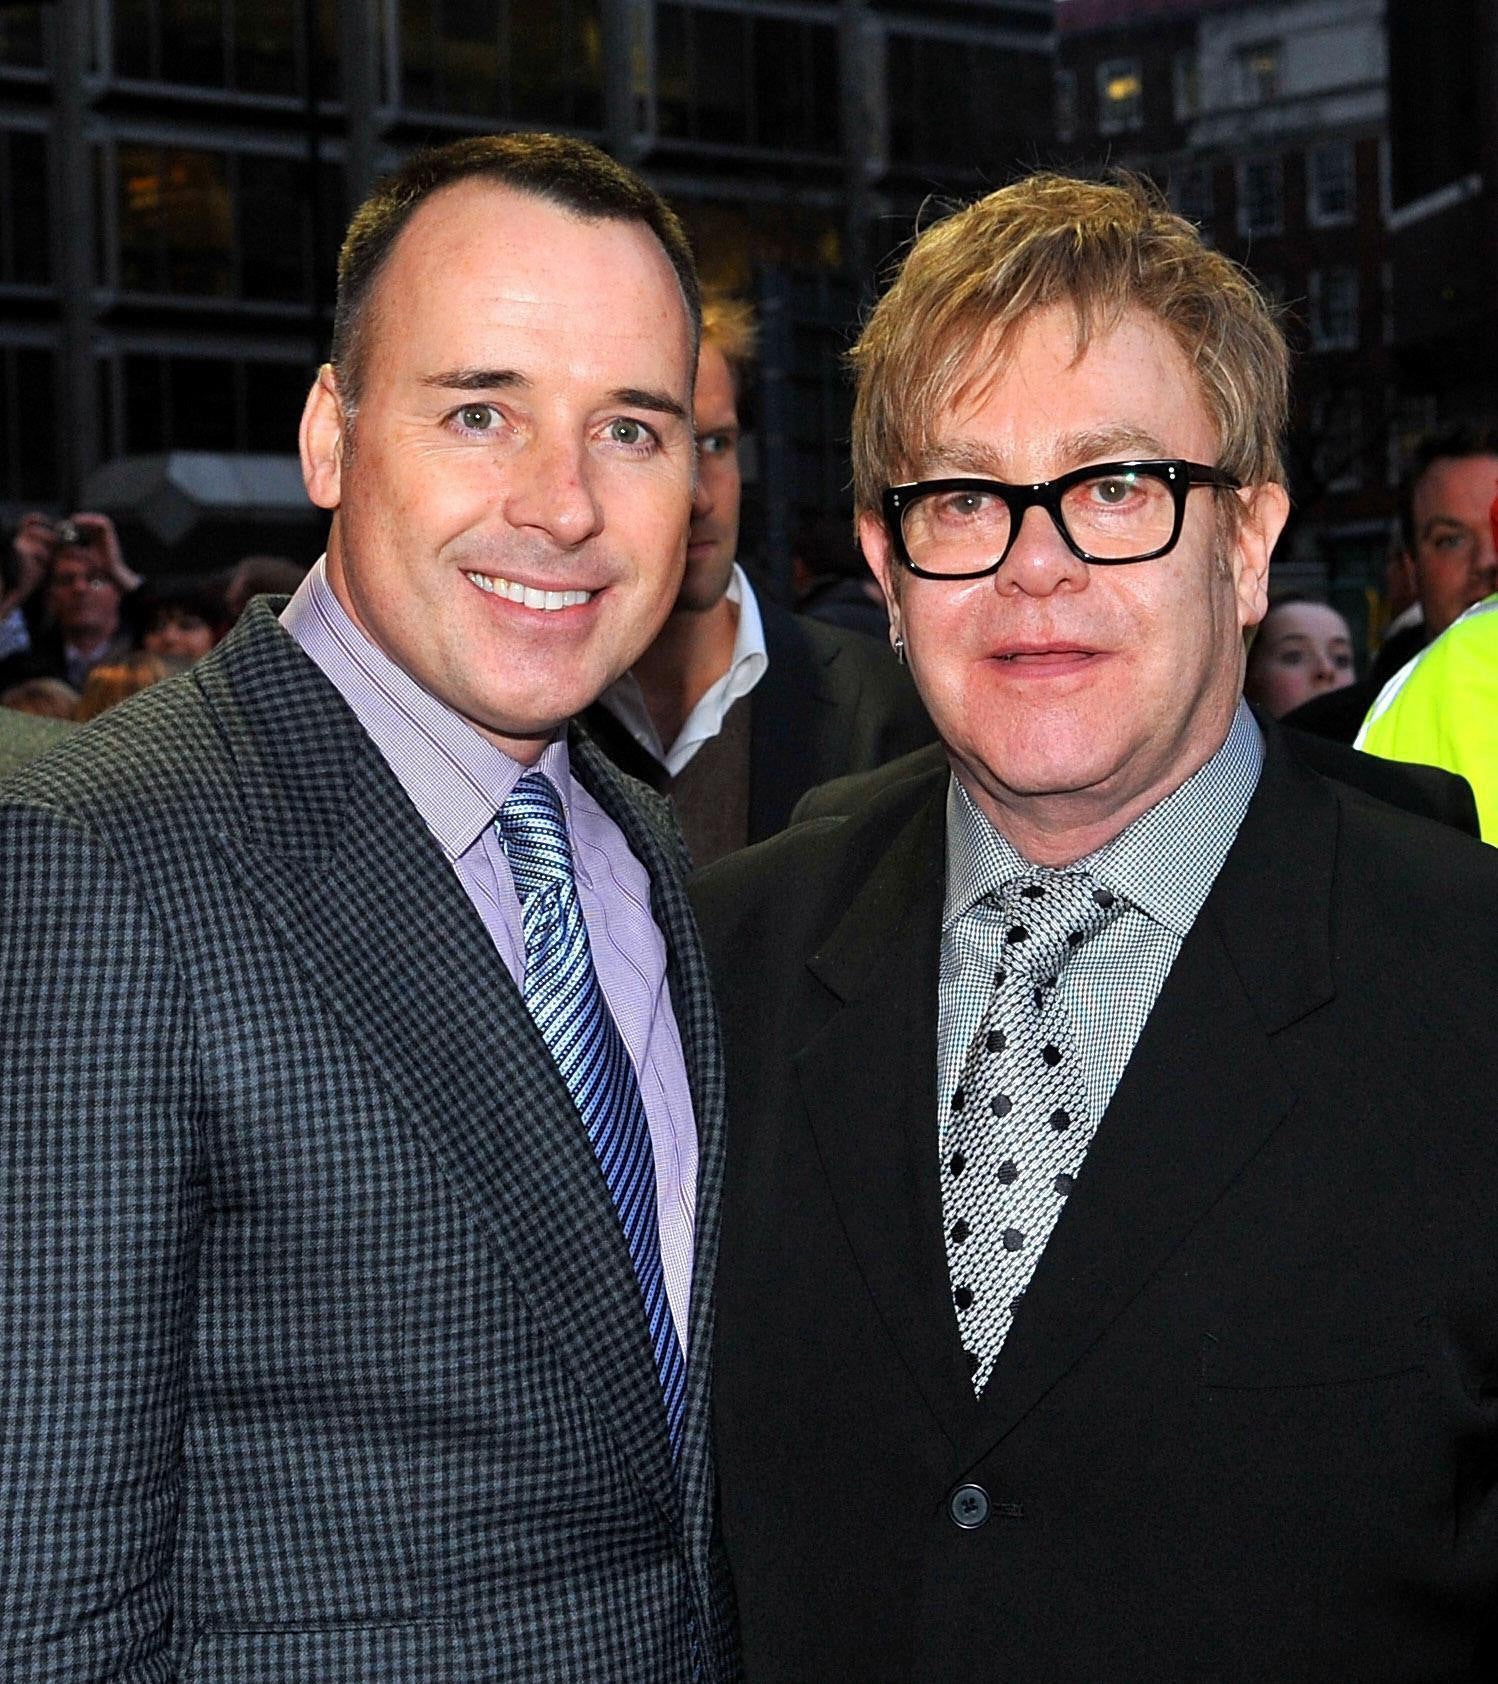 Sir Elton John and partner David Furnish. Sir Elton John says his family is now complete after he became a parent for the second time.